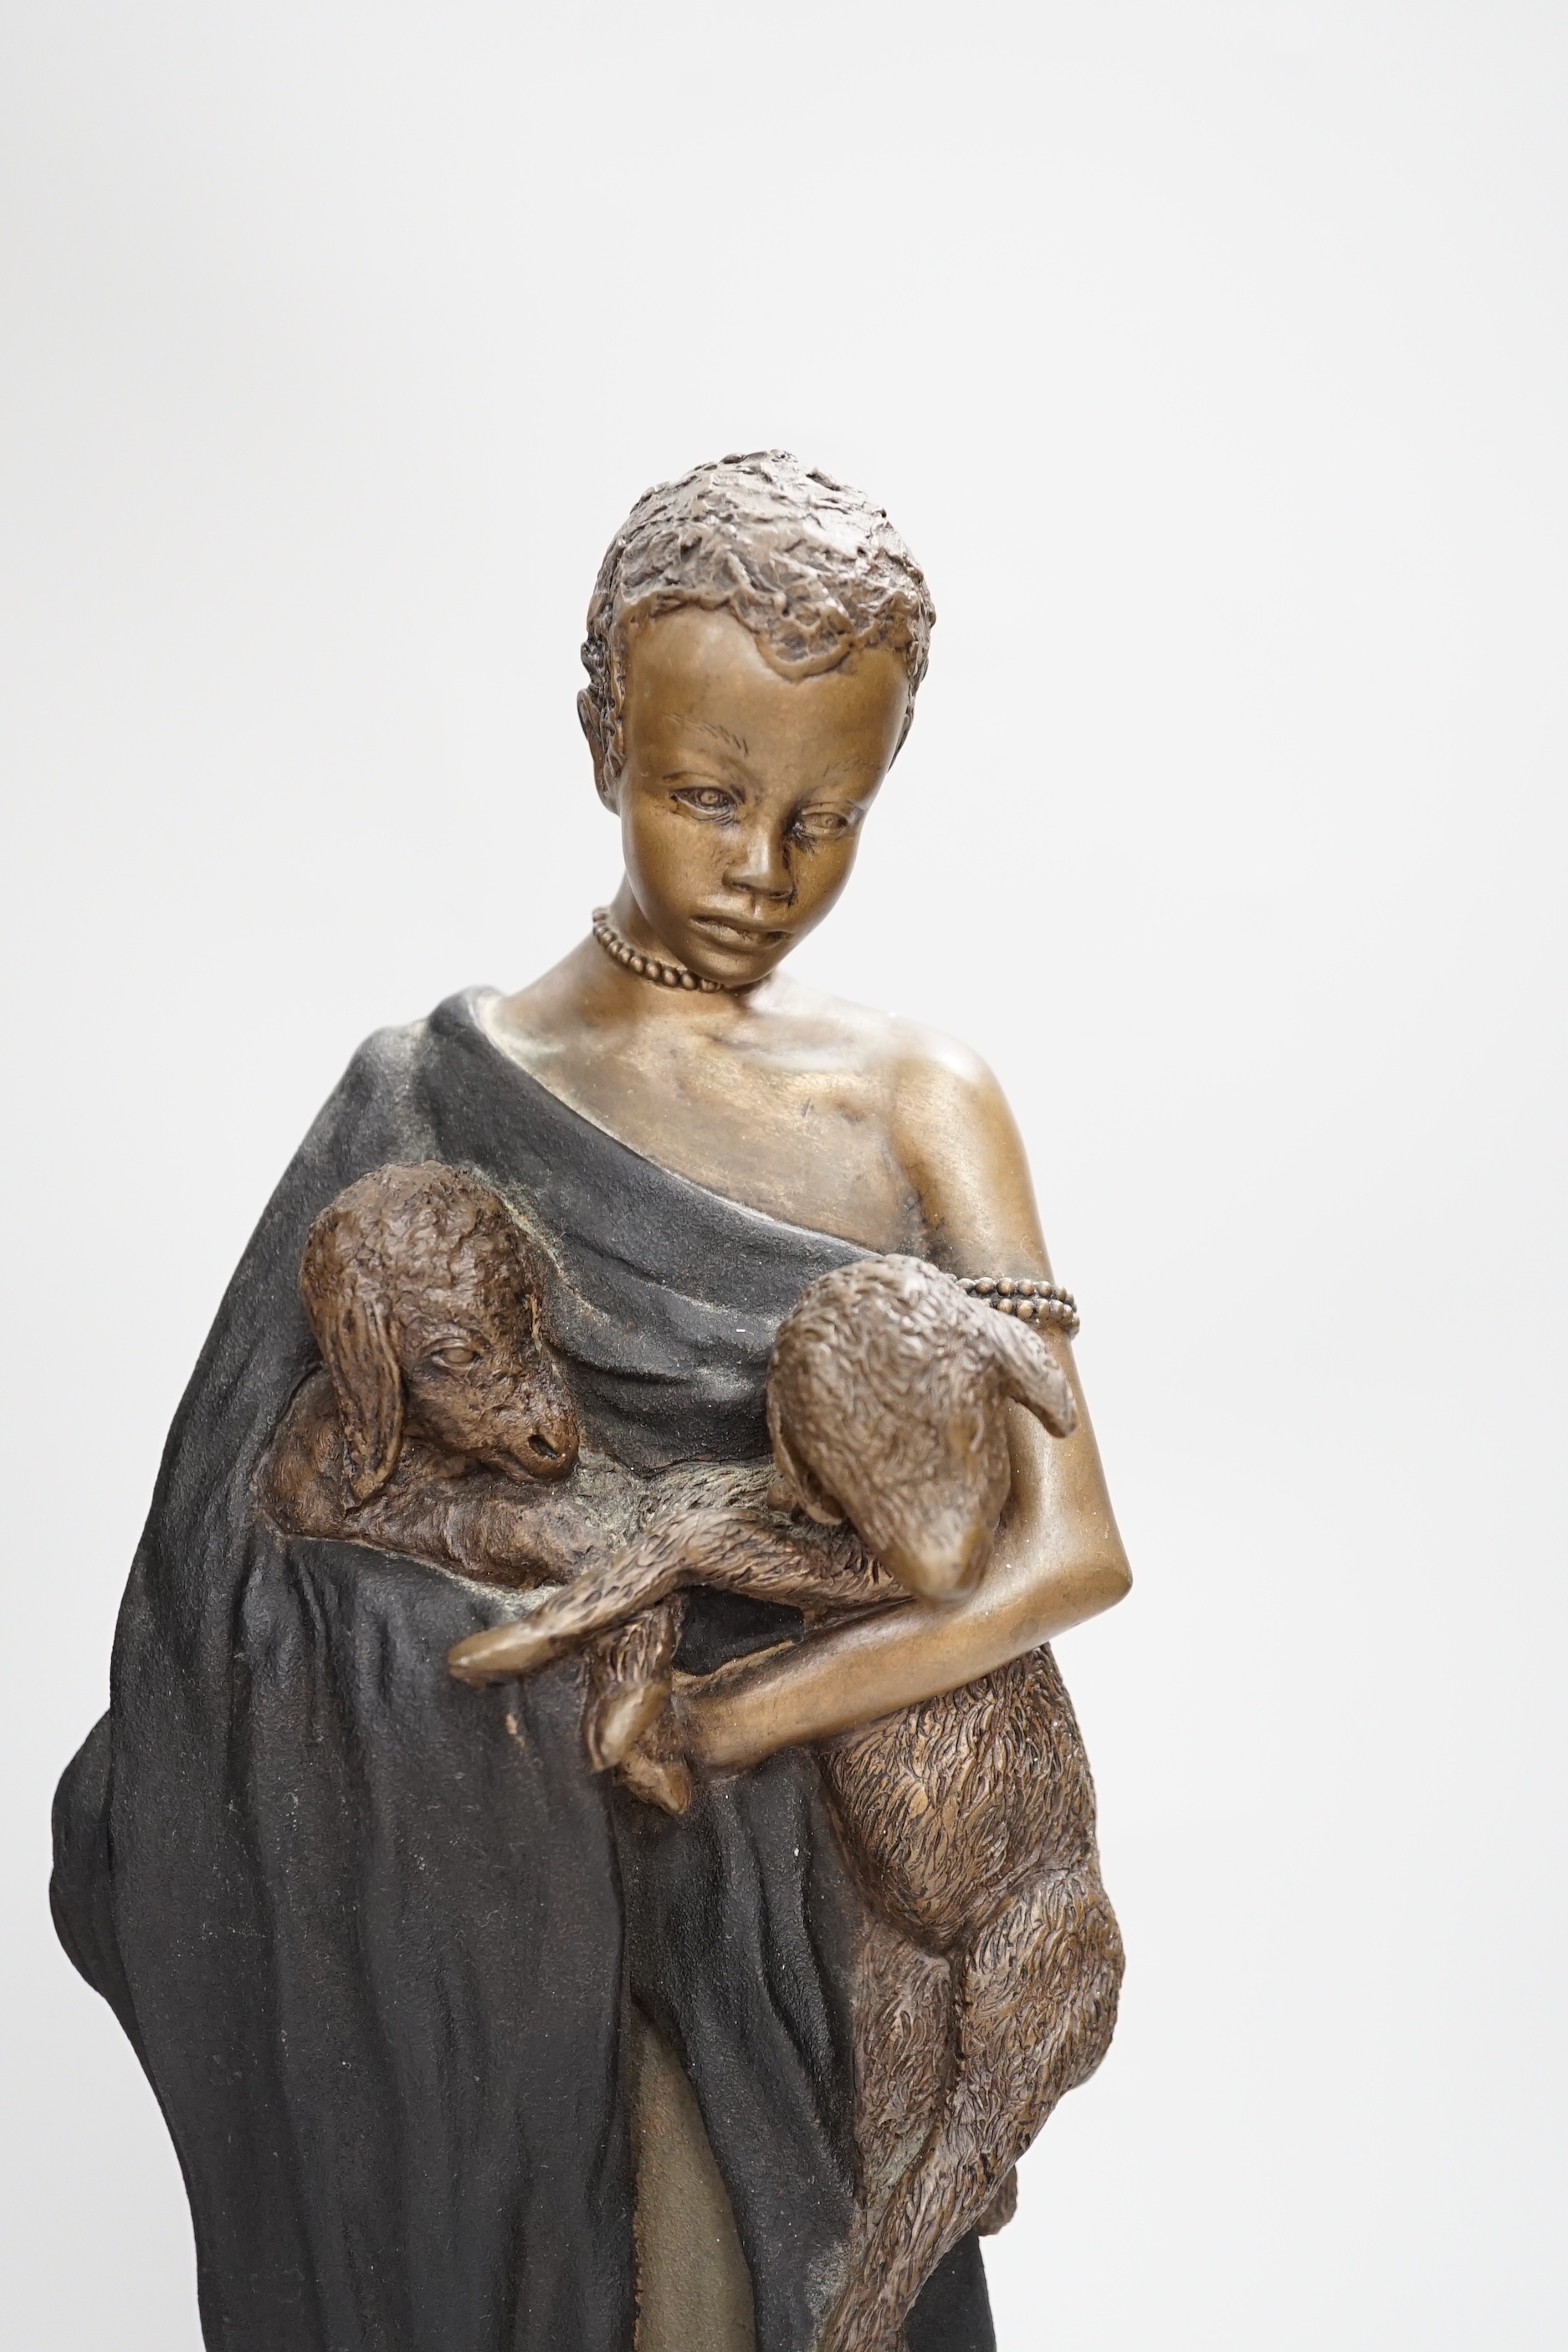 Stacy Baynes, limited edition bronzed resin Masai figure, 